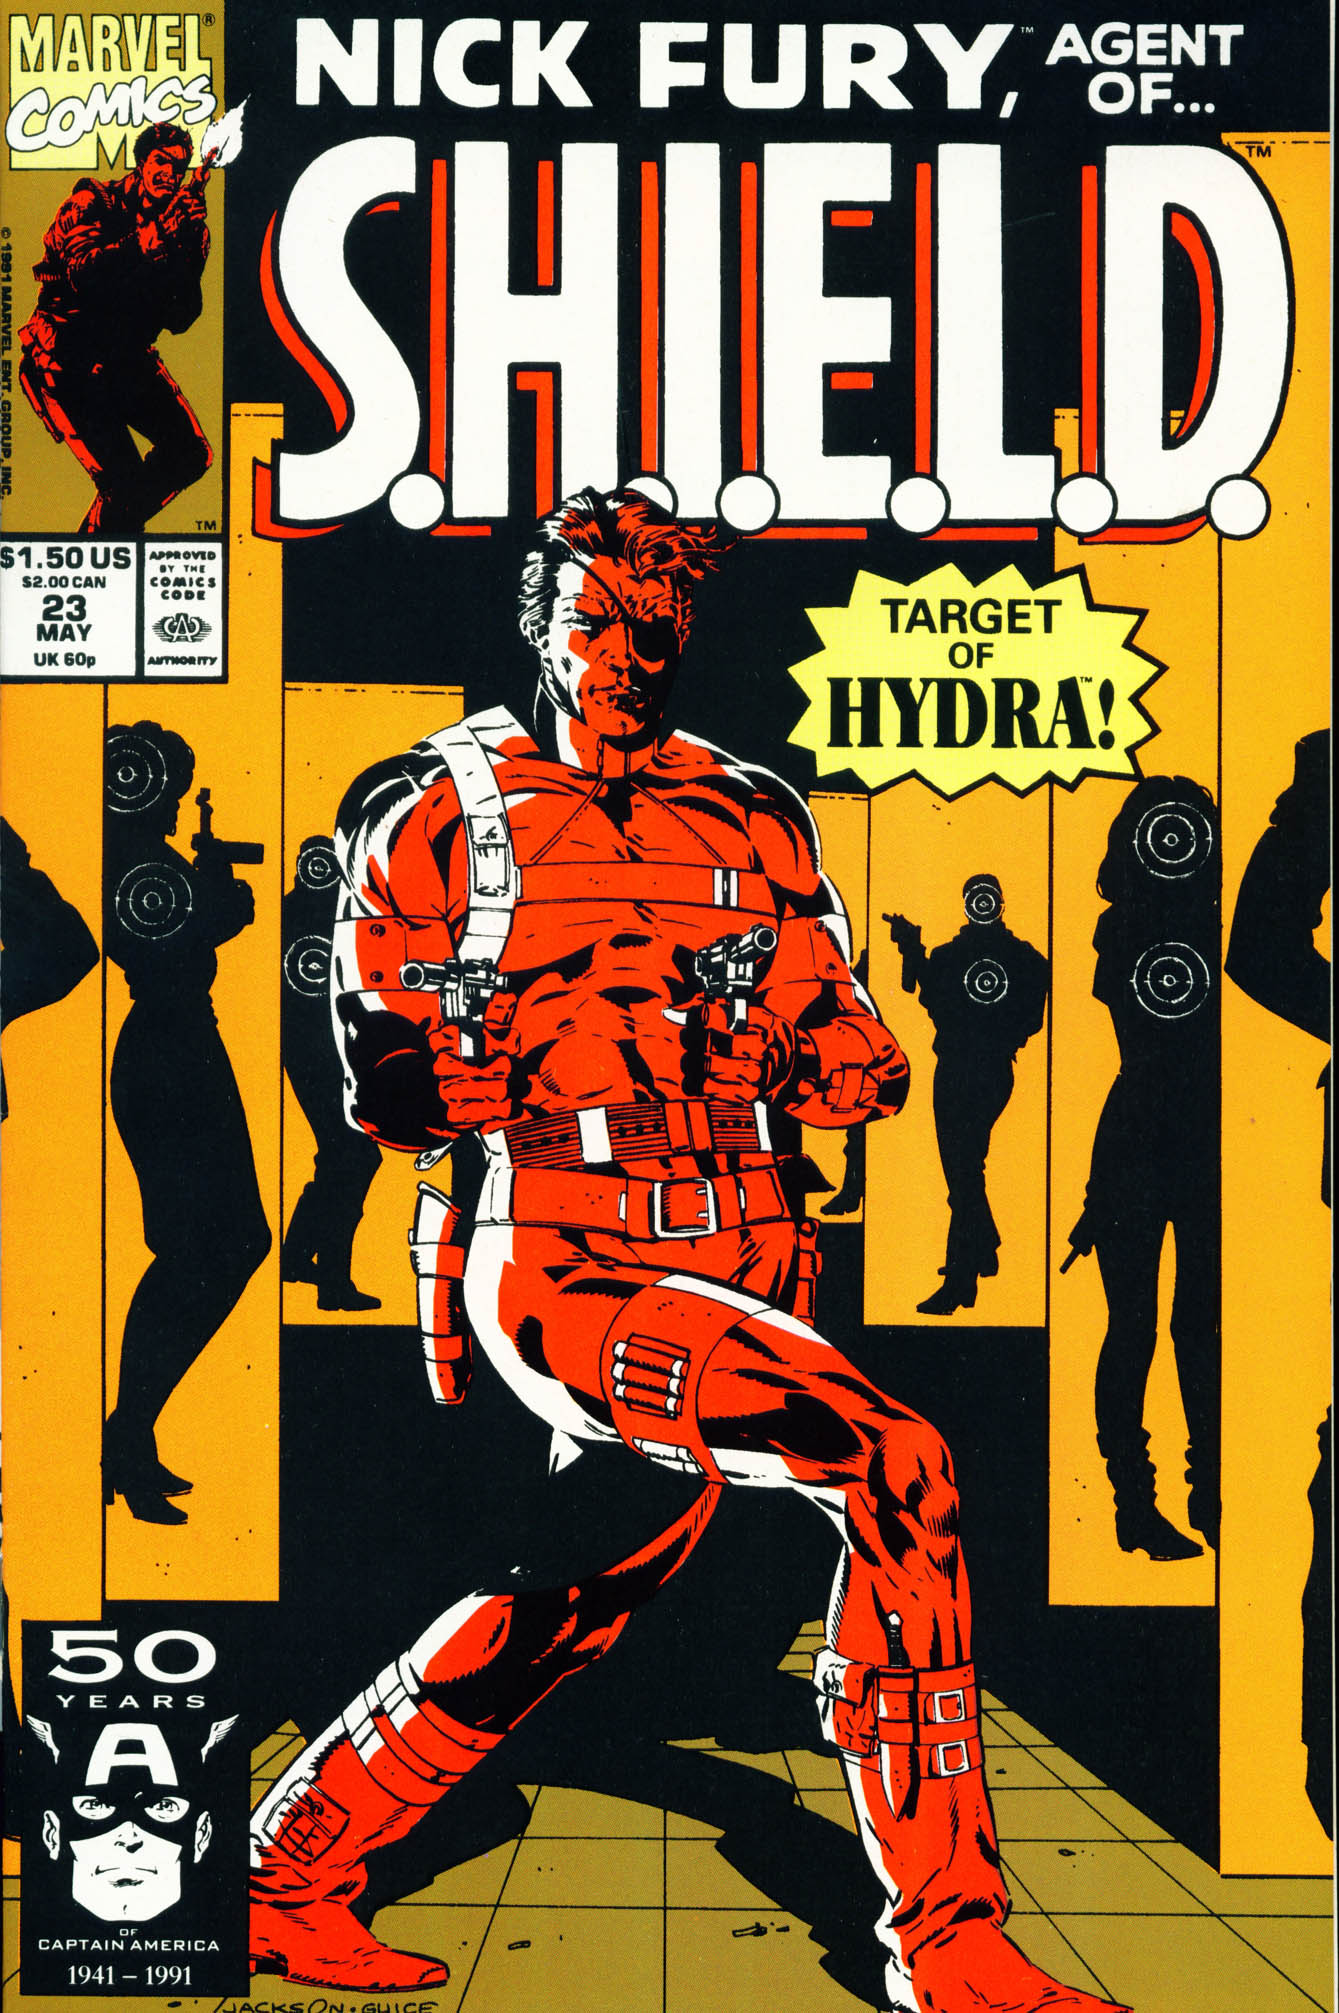 Read online Nick Fury, Agent of S.H.I.E.L.D. comic -  Issue #23 - 1